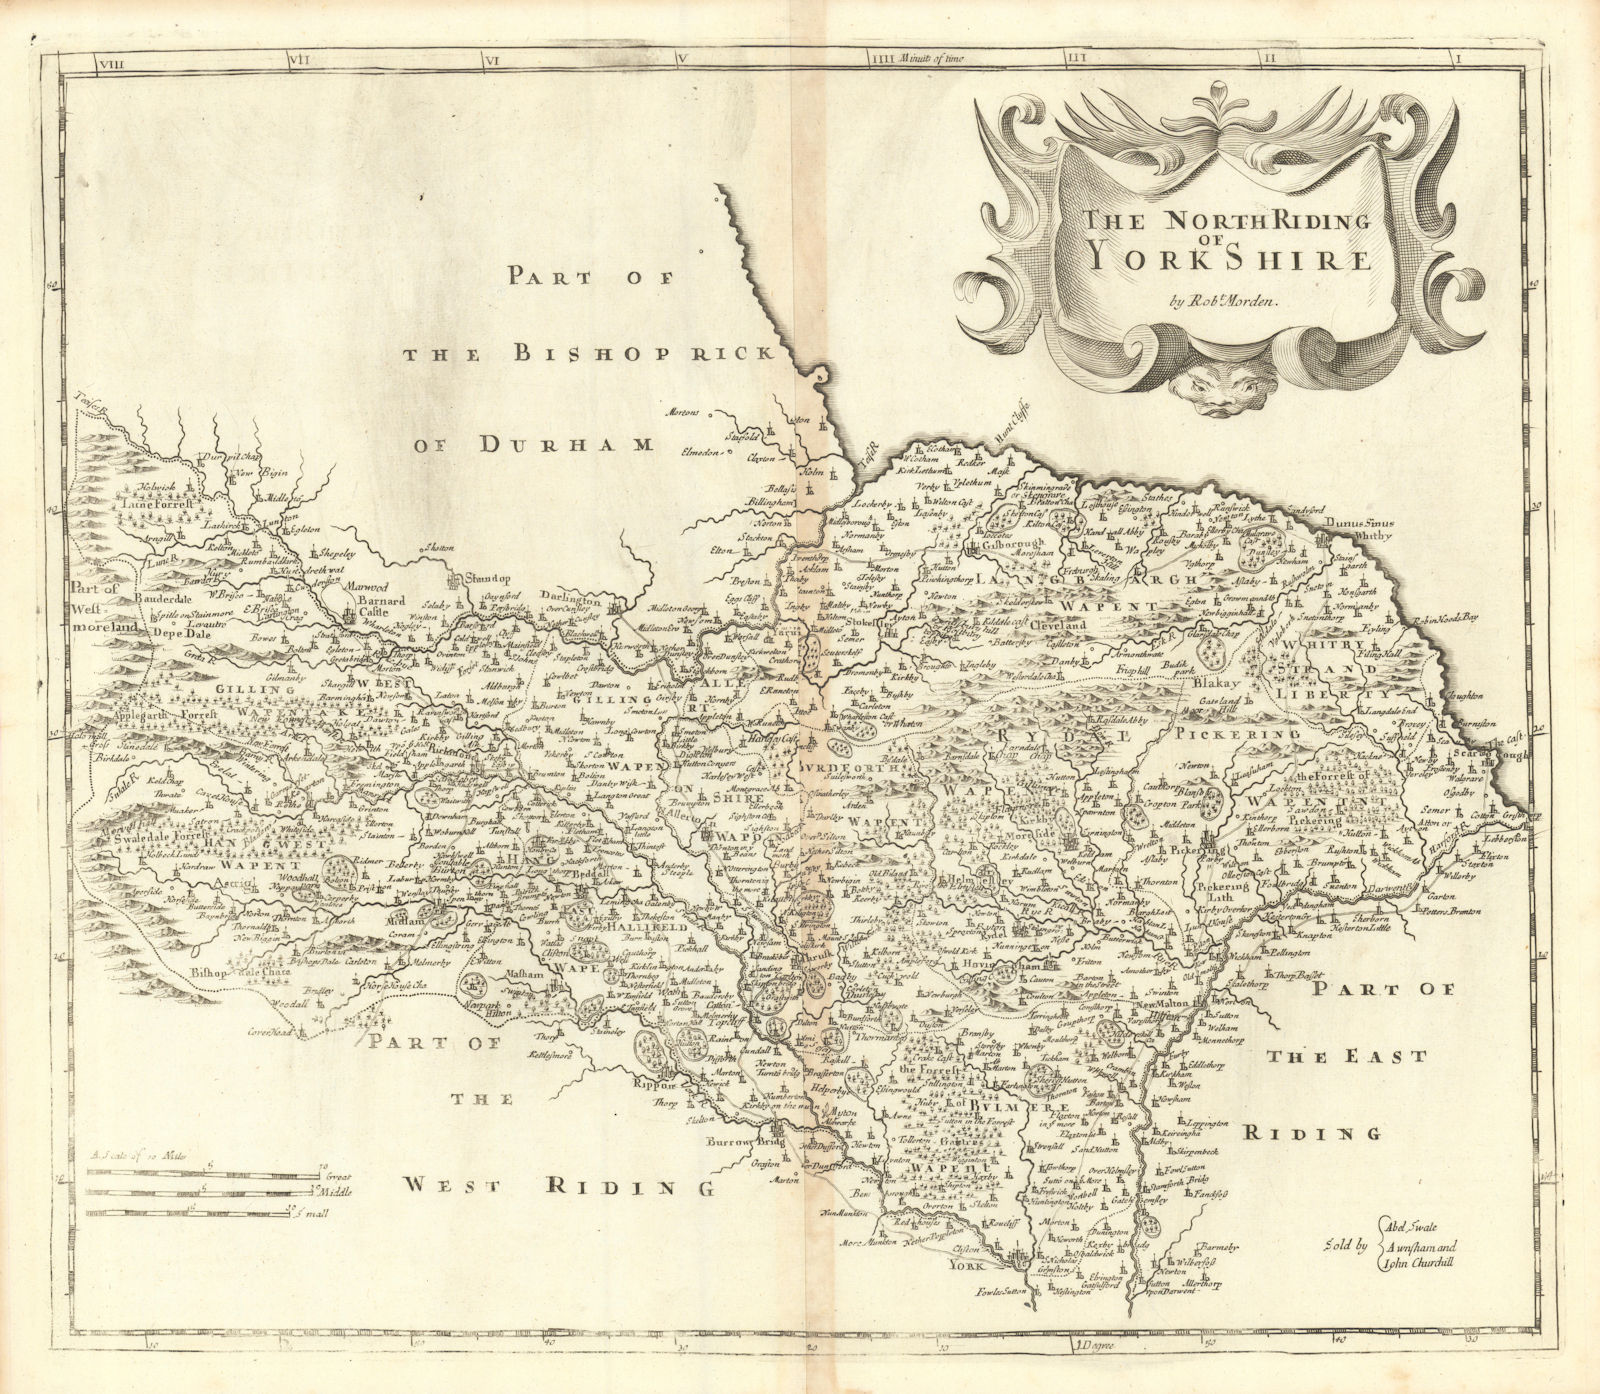 NORTH RIDING OF YORKSHIRE by ROBERT MORDEN from Camden's Britannia 1695 map